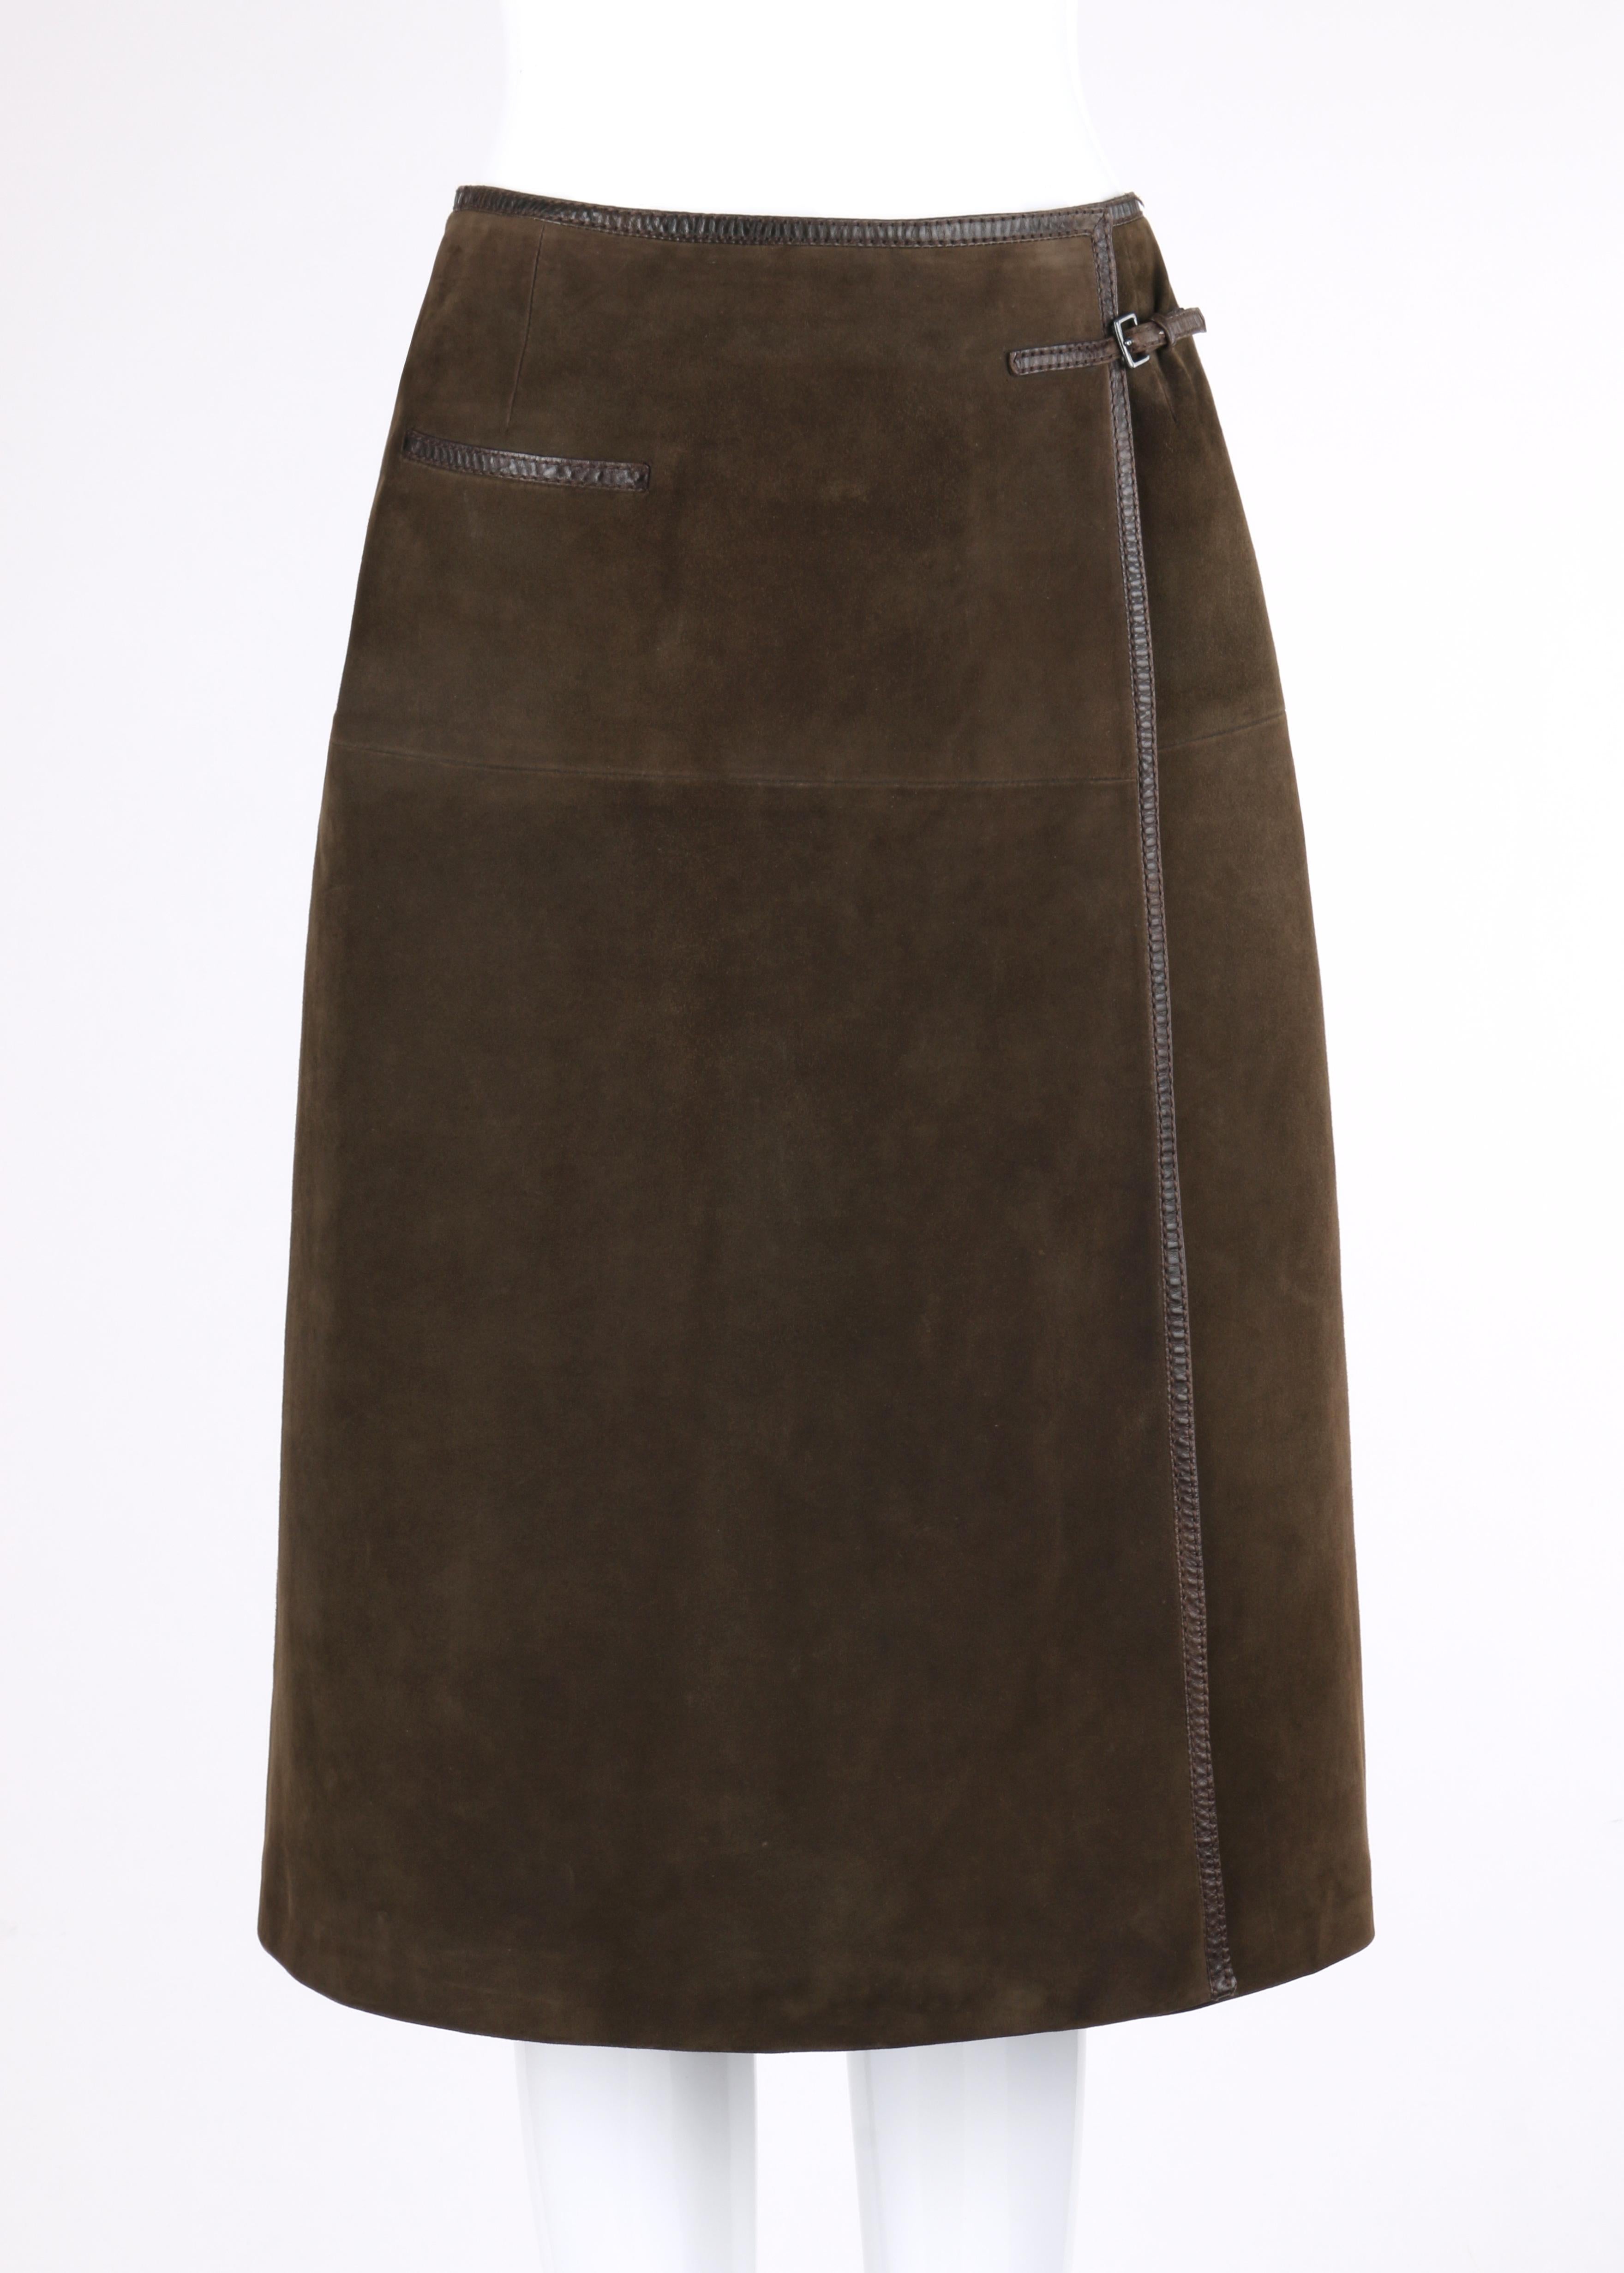 HERMES Sport c.1970's Brown Suede Classic Leather Wrap Skirt

Circa: 1970's
Style: Wrap skirt
Colors: Shades of brown (exterior, interior, detail); shades of nickel and gold (hardware)
Lined: Yes
Unmarked Fabric Content: Leather (exterior); acetate